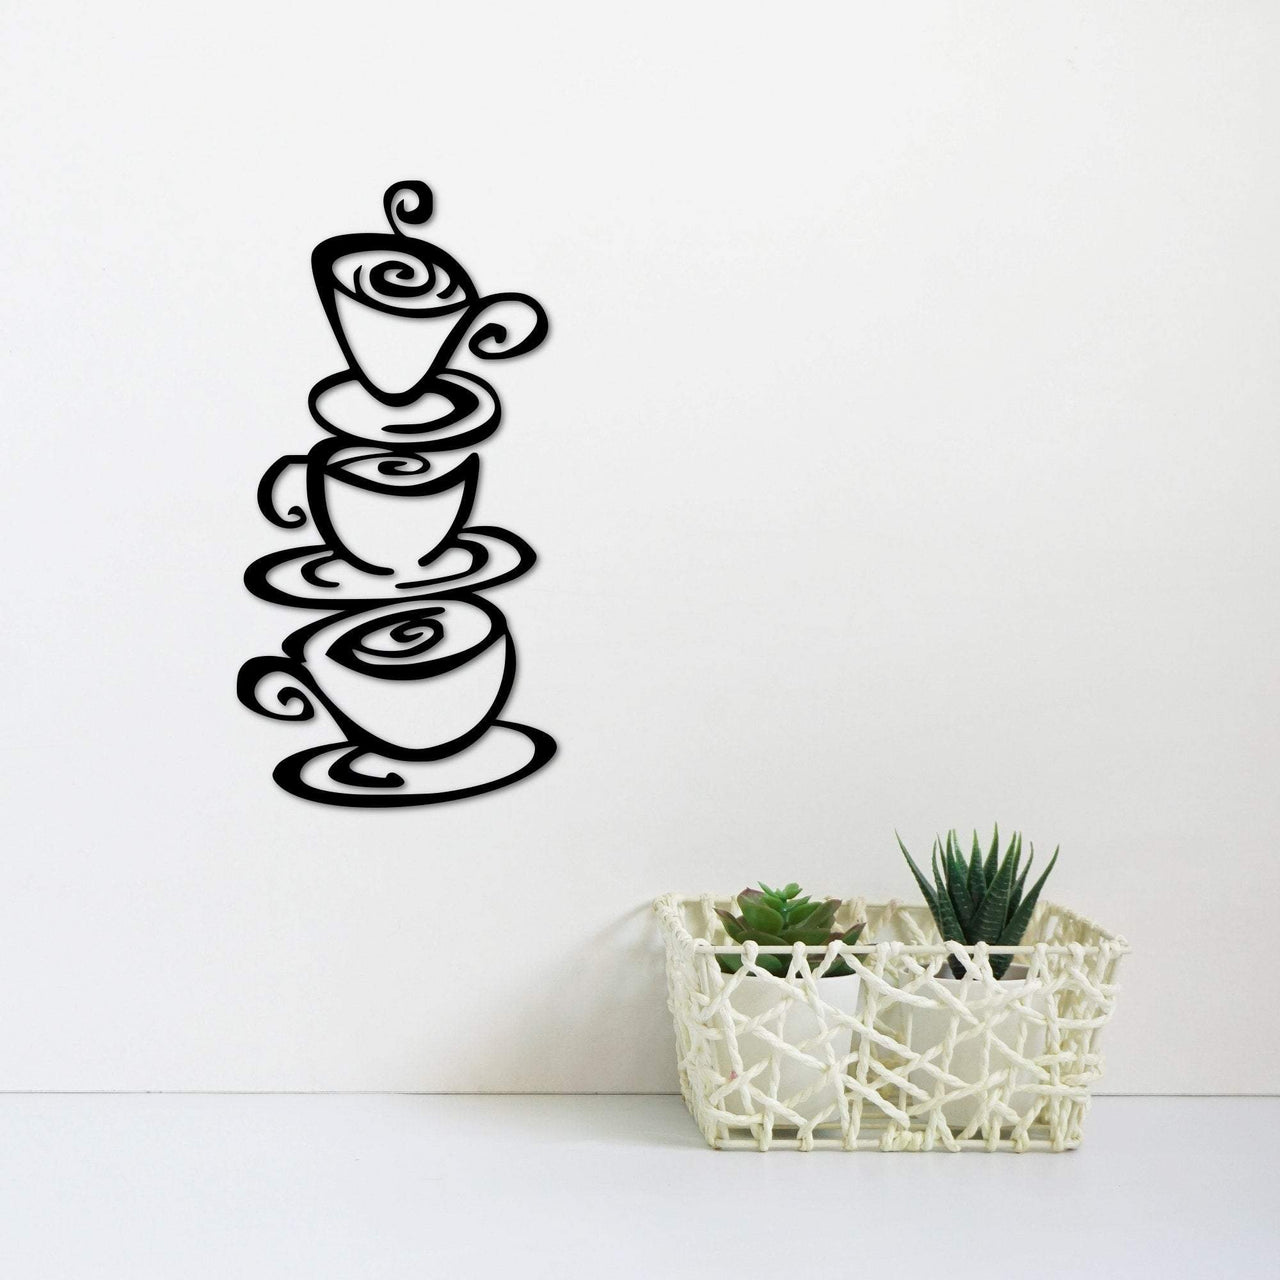 Stacked Coffee Cups | Metal Wall Art | Breakast Room | Coffee Decor | Kitchen Sign | Cafe Decor | Coffee Shop |Coffee Bar | Coffee Gifts